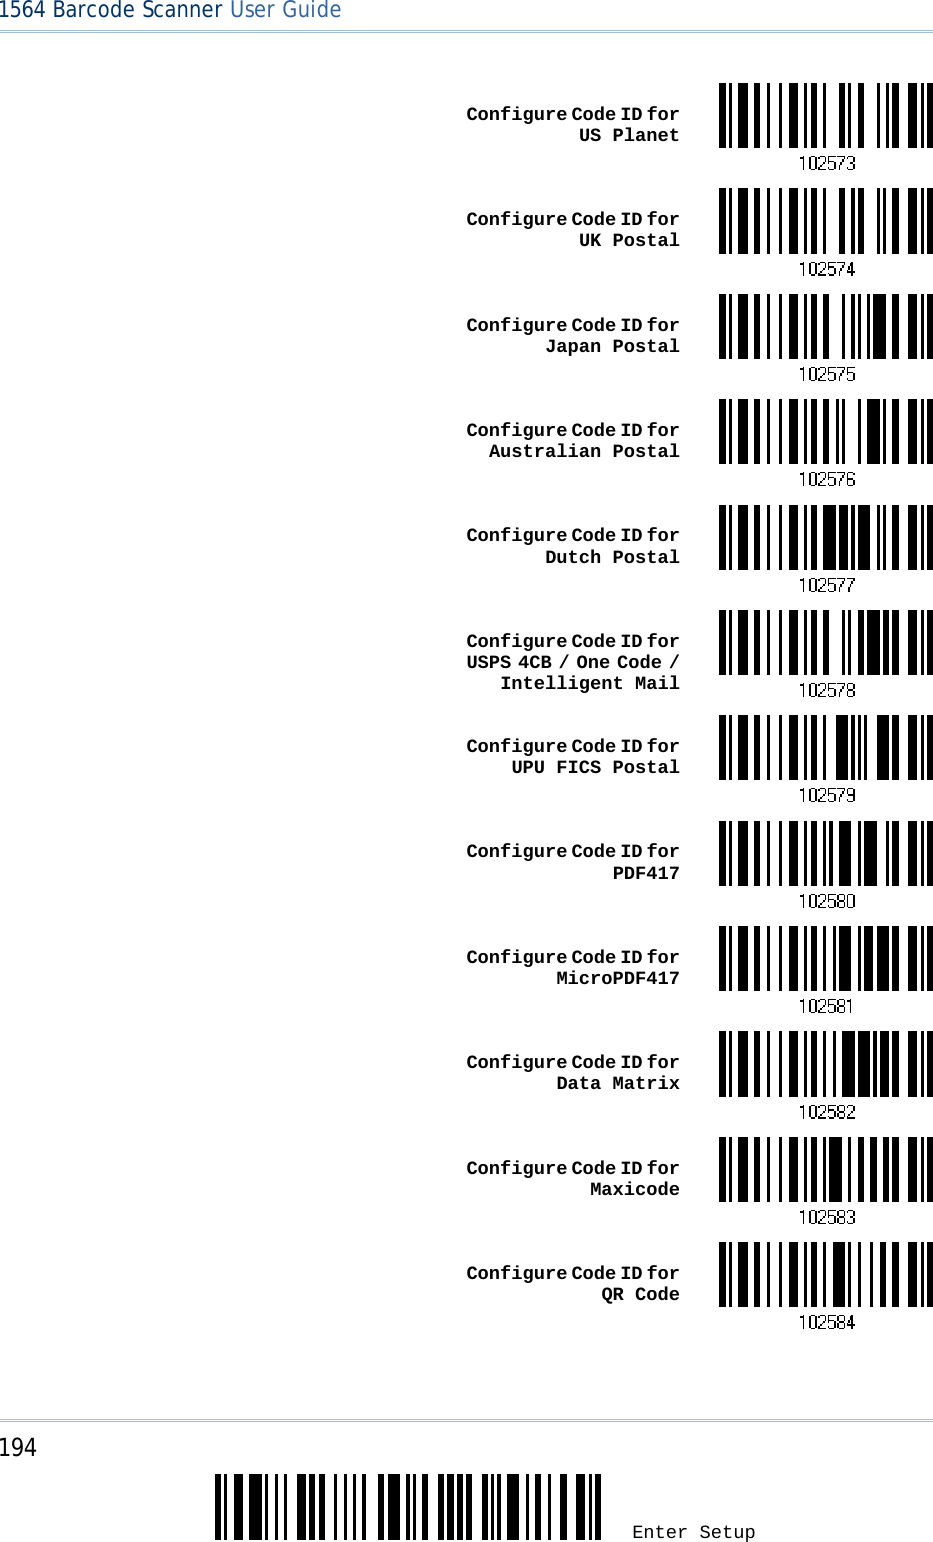 194 Enter Setup 1564 Barcode Scanner User Guide   Configure Code ID for US Planet  Configure Code ID for UK Postal  Configure Code ID for Japan Postal  Configure Code ID for Australian Postal Configure Code ID for Dutch Postal  Configure Code ID for USPS 4CB / One Code / Intelligent Mail  Configure Code ID for UPU FICS Postal Configure Code ID for PDF417  Configure Code ID for MicroPDF417  Configure Code ID for Data Matrix  Configure Code ID for Maxicode  Configure Code ID for QR Code 